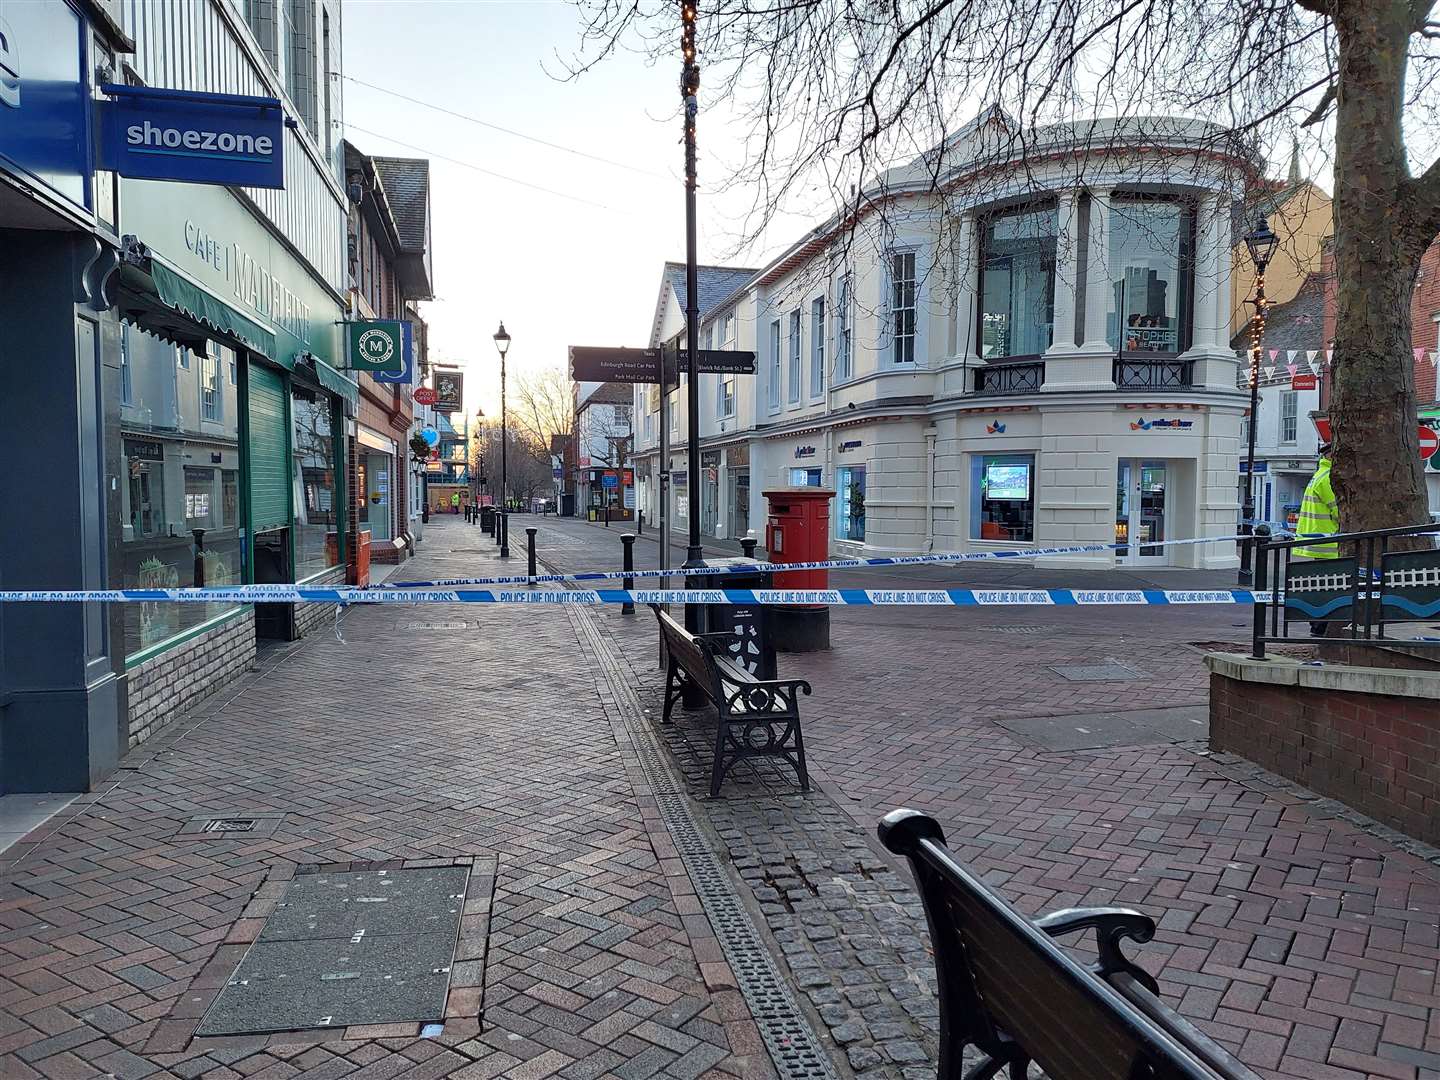 Ashford high street was taped off by police following the ‘unexplained’ death of a woman